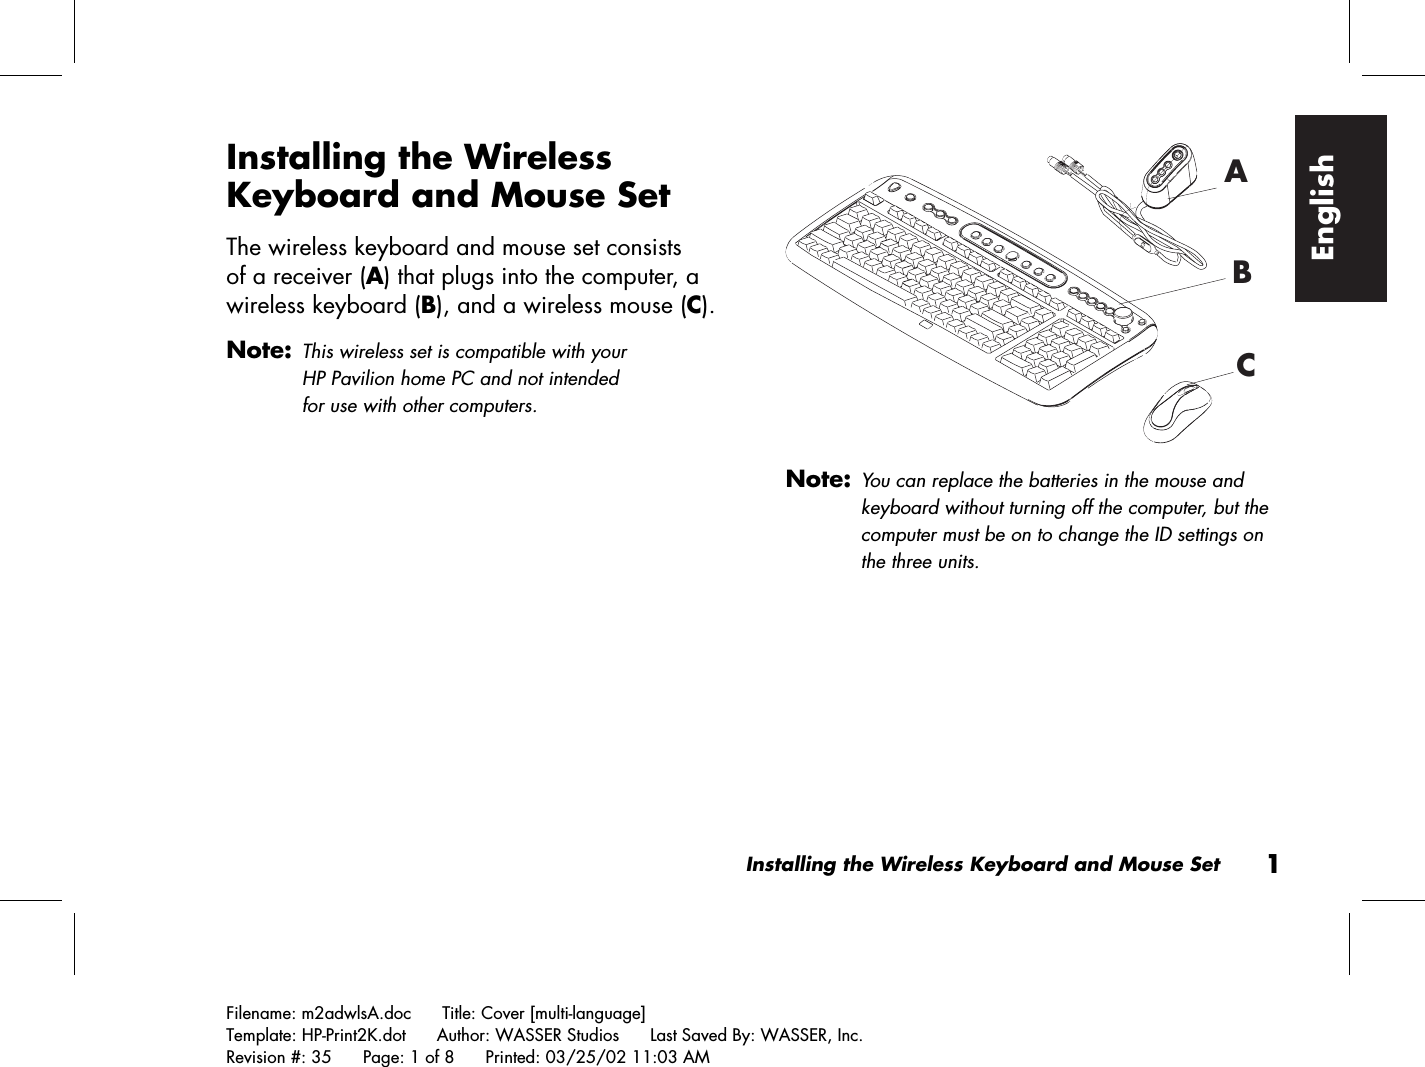 Installing the Wireless Keyboard and Mouse Set1Filename: m2adwlsA.doc      Title: Cover [multi-language]Template: HP-Print2K.dot      Author: WASSER Studios      Last Saved By: WASSER, Inc.Revision #: 35      Page: 1 of 8      Printed: 03/25/02 11:03 AMEnglishInstalling the WirelessKeyboard and Mouse SetThe wireless keyboard and mouse set consistsof a receiver (A) that plugs into the computer, awireless keyboard (B), and a wireless mouse (C).Note:This wireless set is compatible with yourHP Pavilion home PC and not intendedfor use with other computers.ABCNote:You can replace the batteries in the mouse andkeyboard without turning off the computer, but thecomputer must be on to change the ID settings onthe three units.